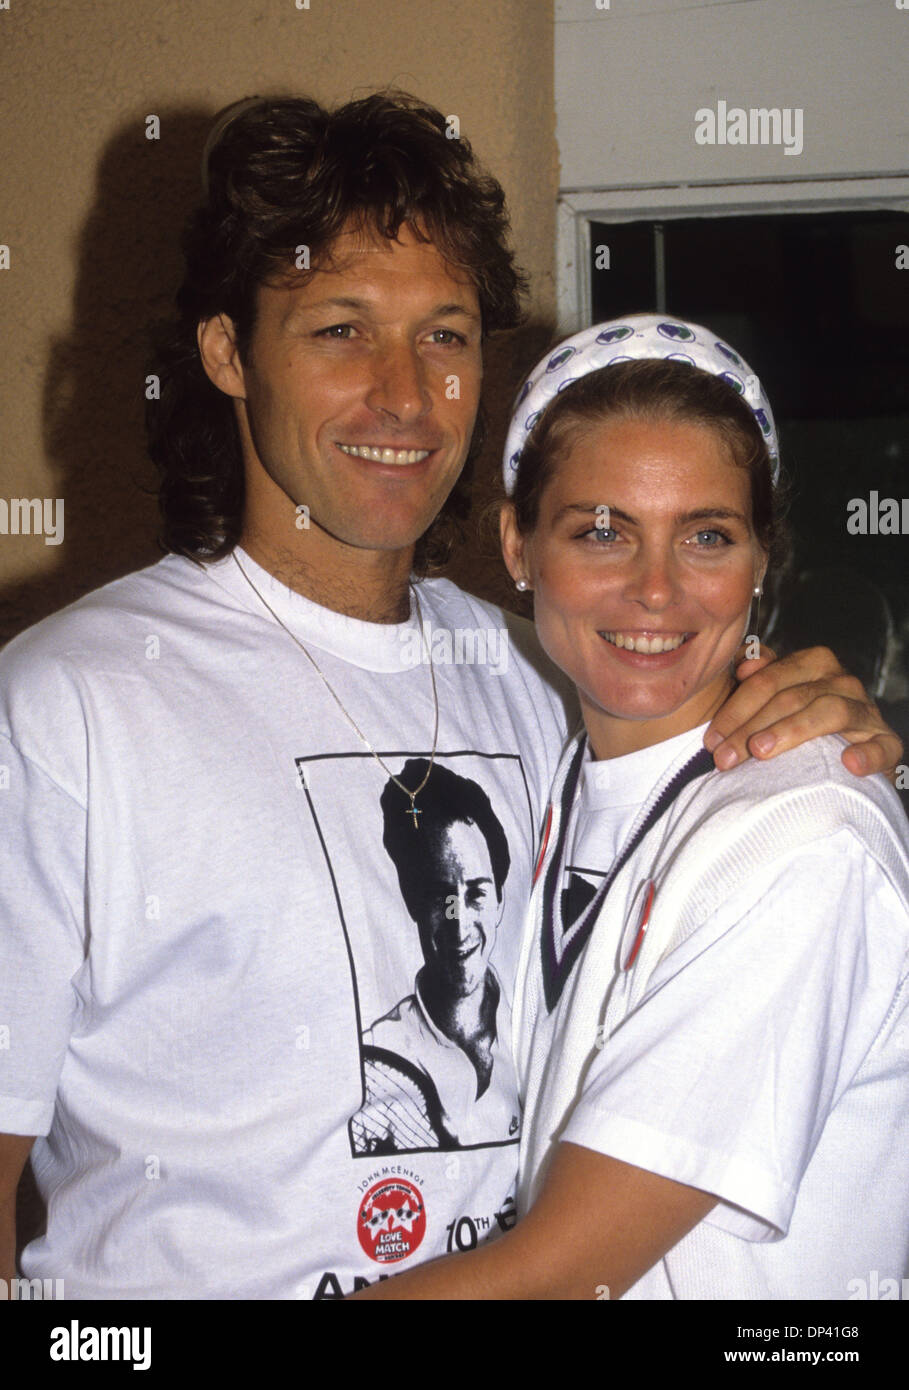 49 Ron Duguay Kim Alexis Photos & High Res Pictures - Getty Images